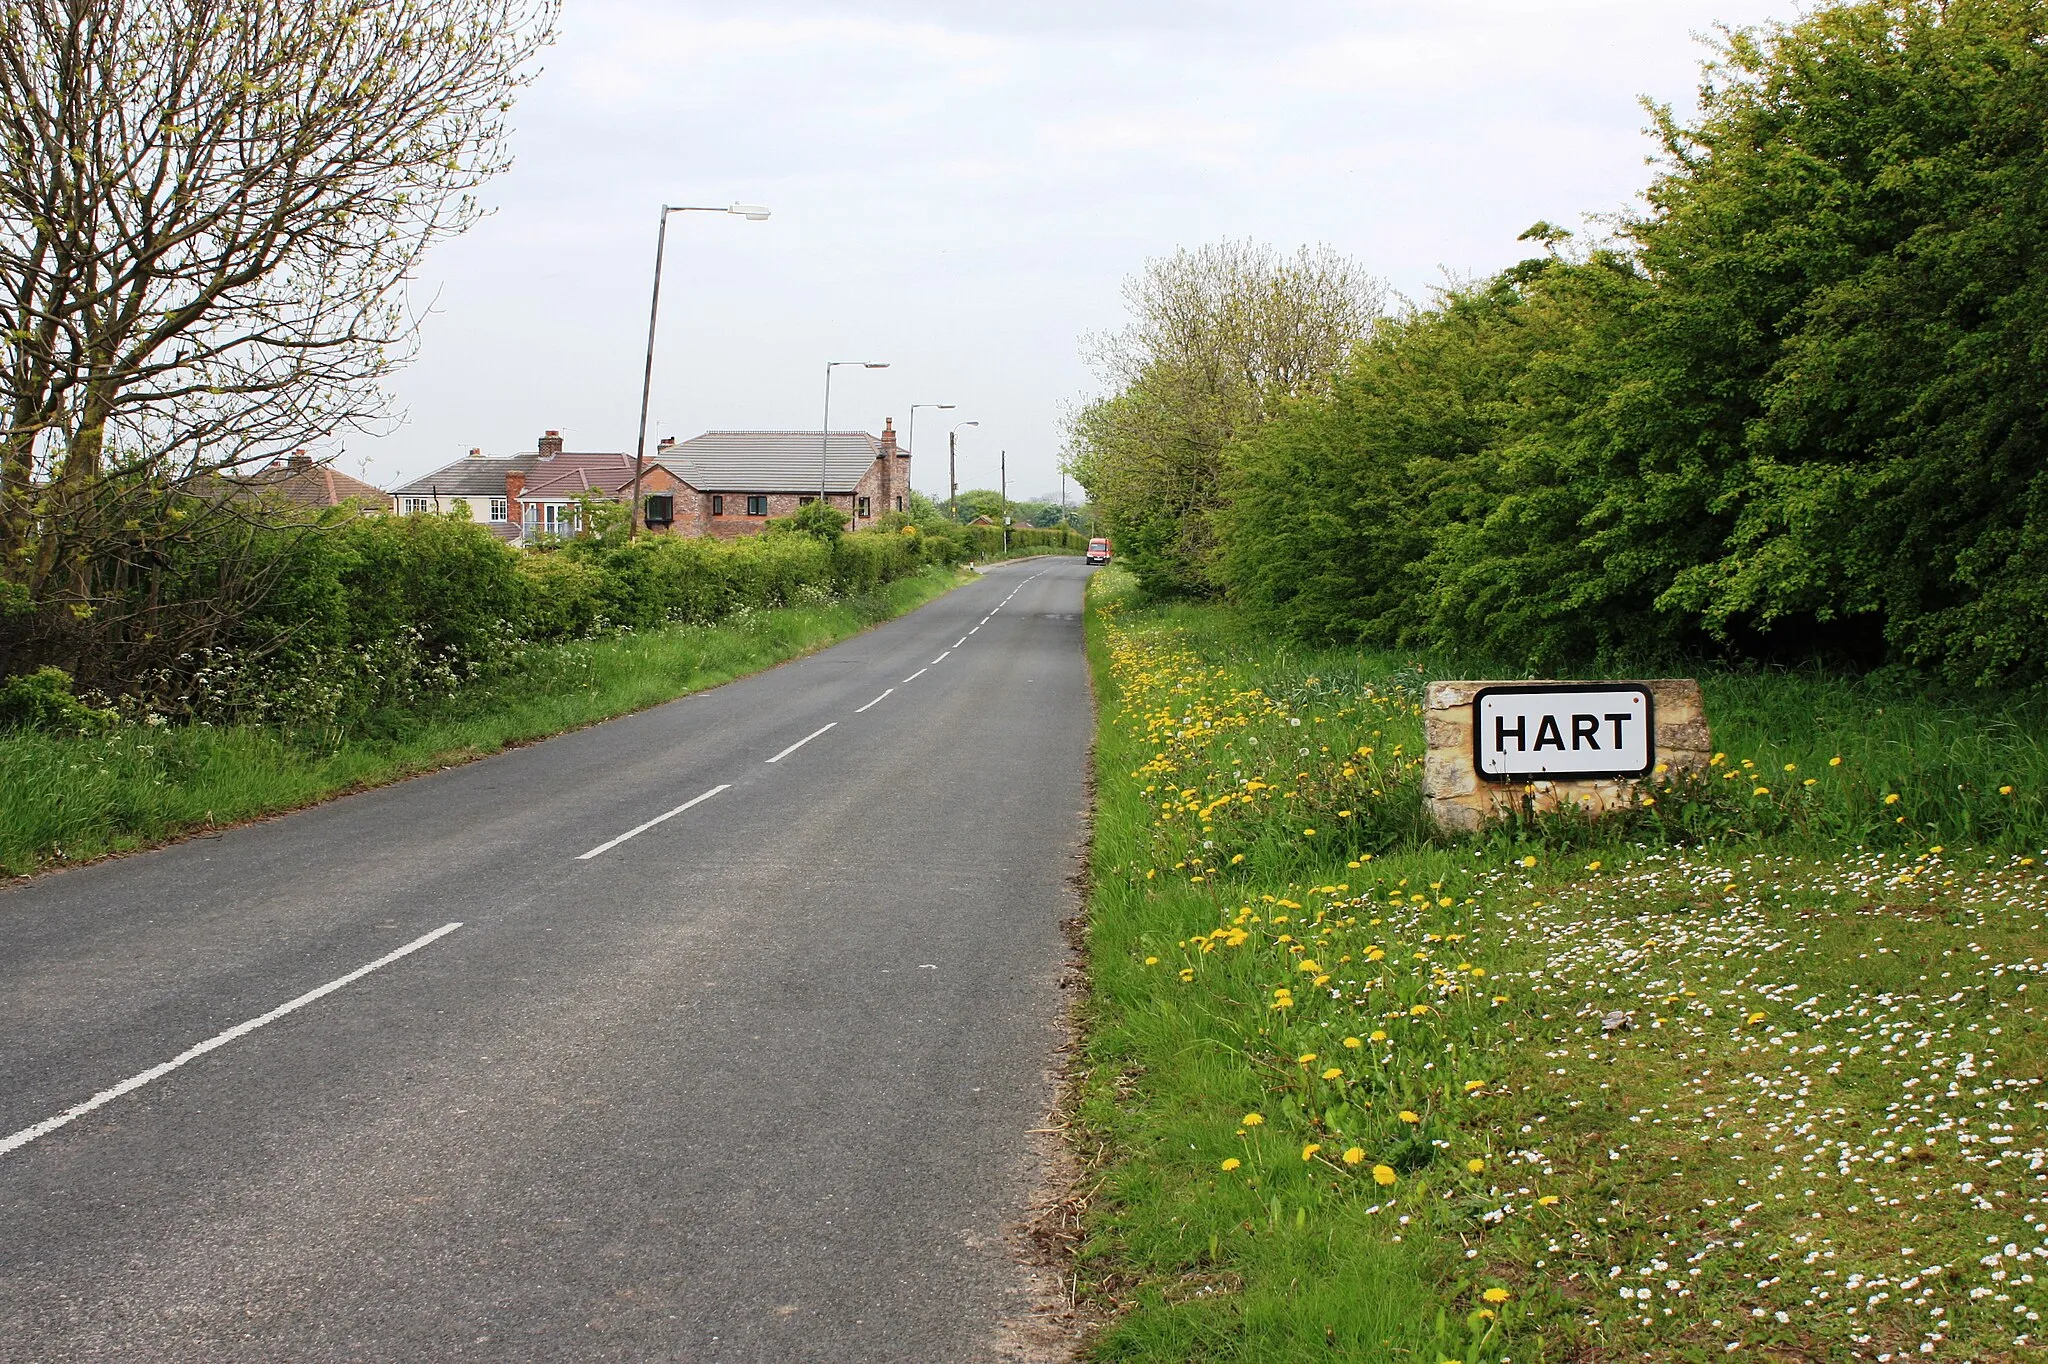 Photo showing: Approach road to Hart